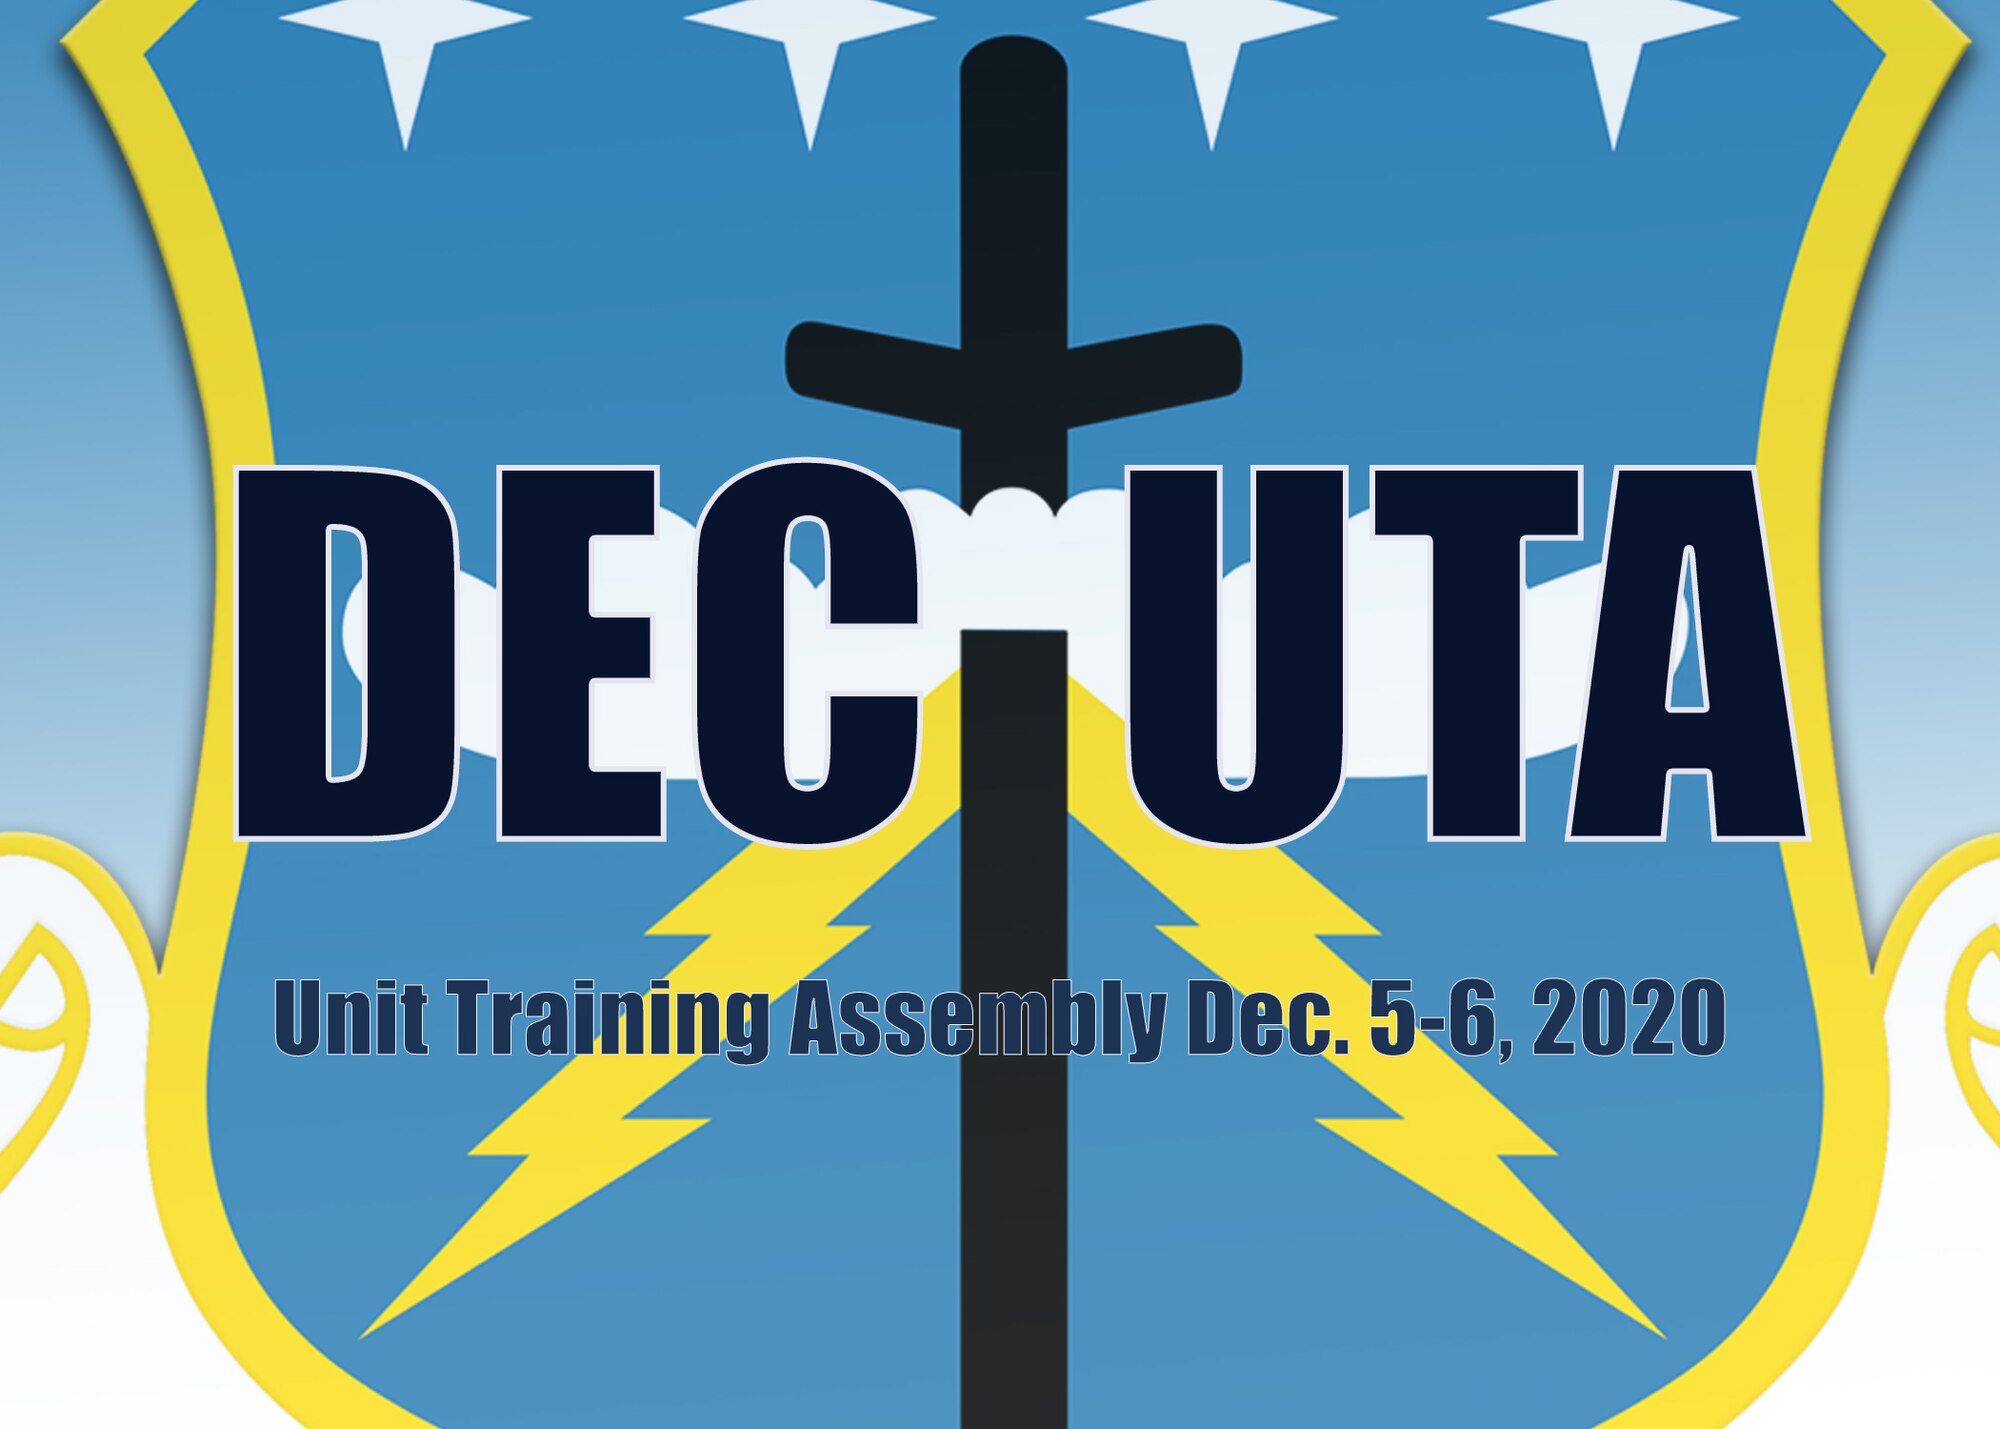 The 403rd Wing Unit Training Assembly is Dec. 5-6, with COVID-19 mitigation measures in place. (U.S. Air Force graphic by Lt. Col. Marnee A.C. Losurdo)